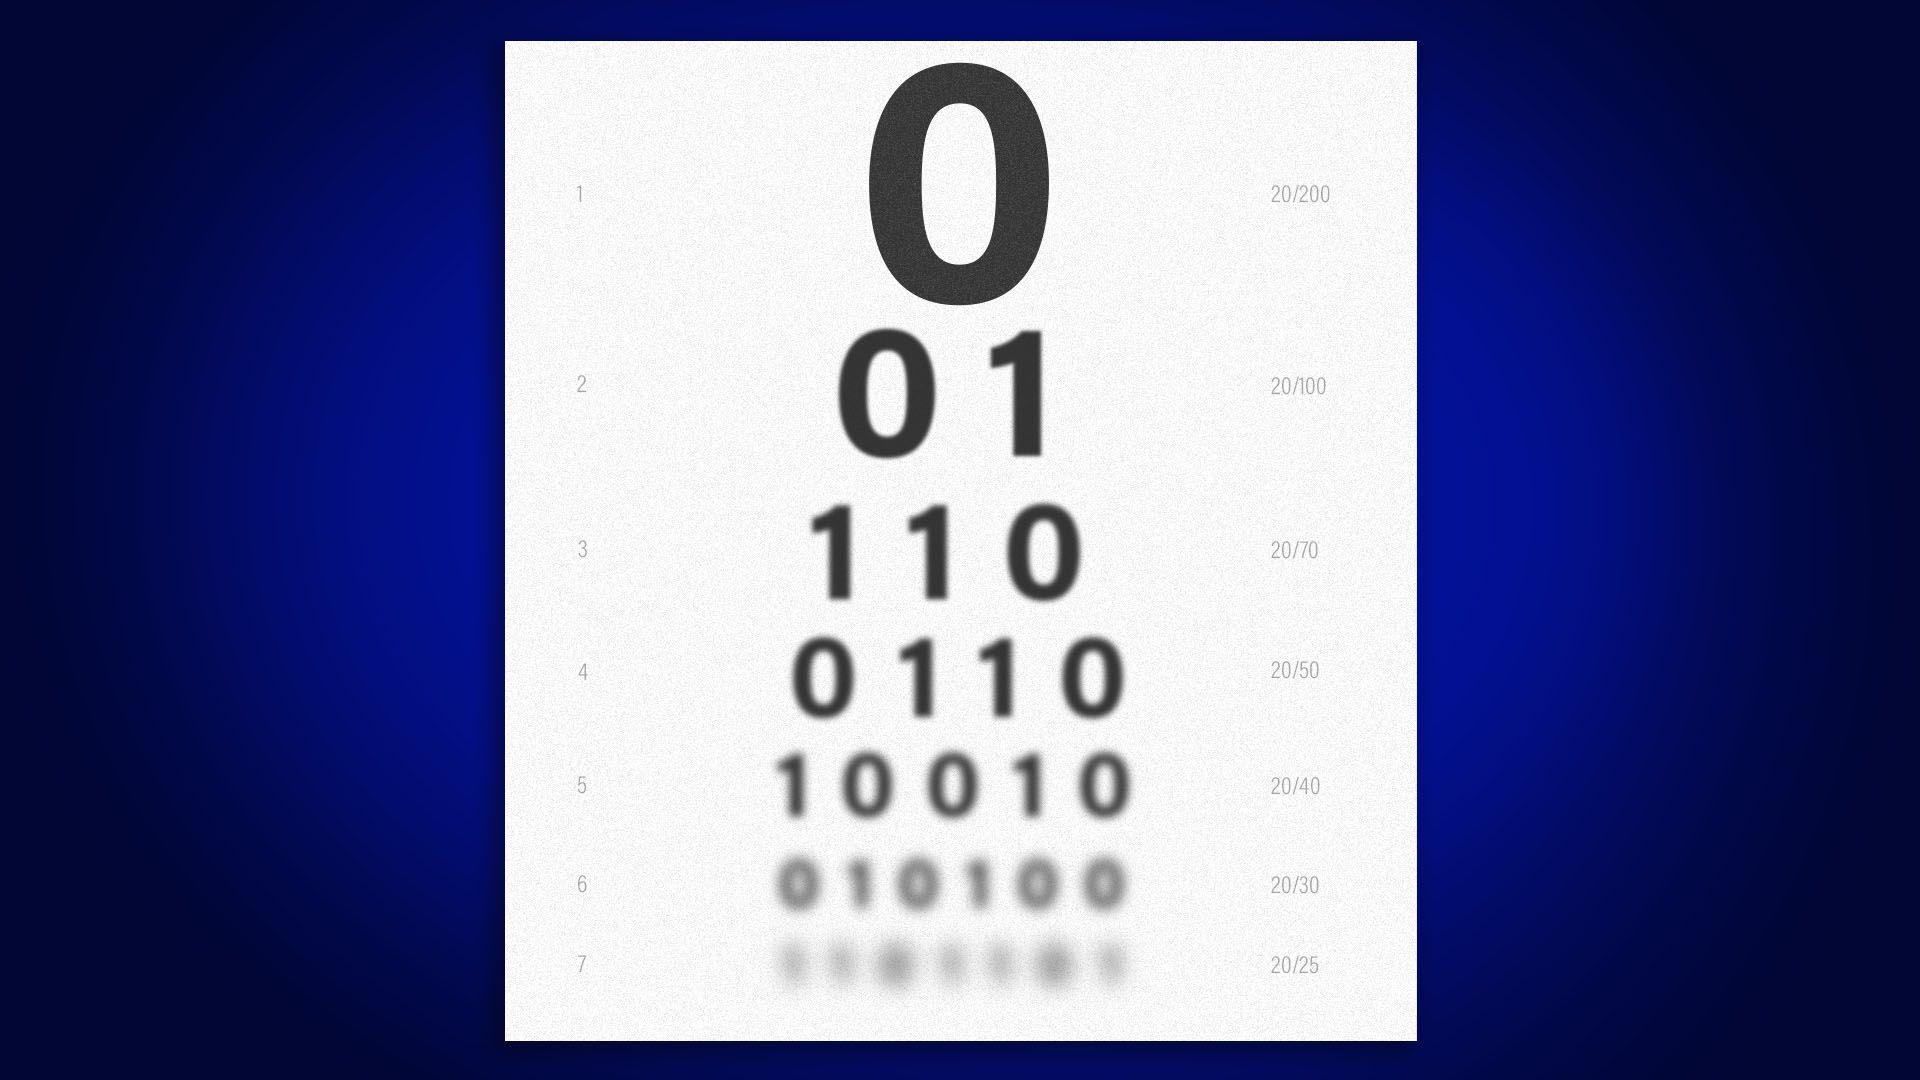 Illustration of an eye chart made up of ones and zeros